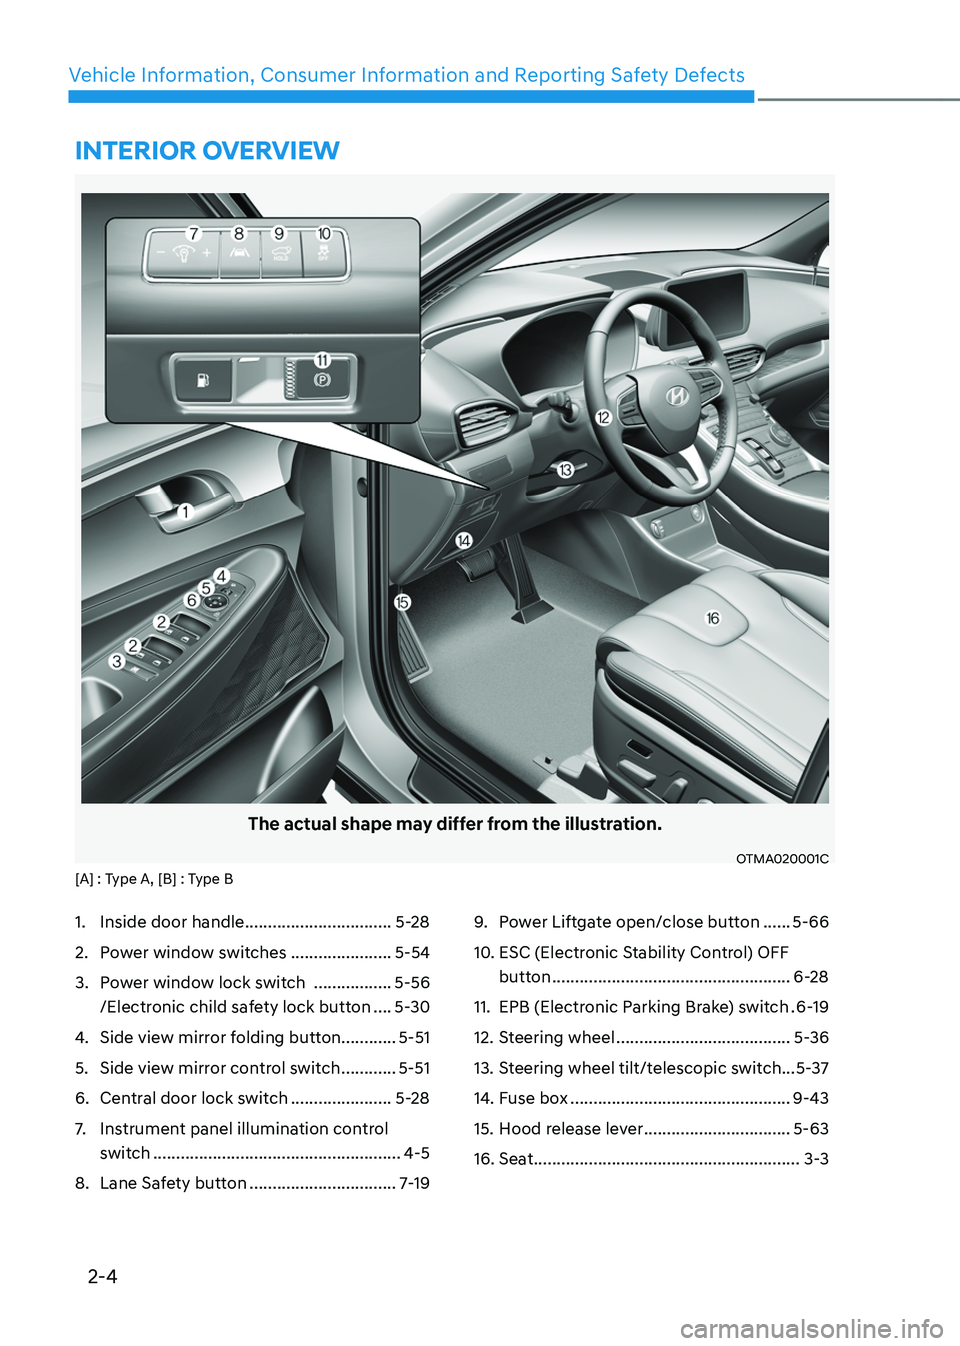 HYUNDAI SANTA FE HYBRID 2021  Owners Manual 2-4
Vehicle Information, Consumer Information and Reporting Safety Defects
The actual shape may differ from the illustration.
OTMA020001C[A] : Type A, [B] : Type B
1. Inside door handle ..............